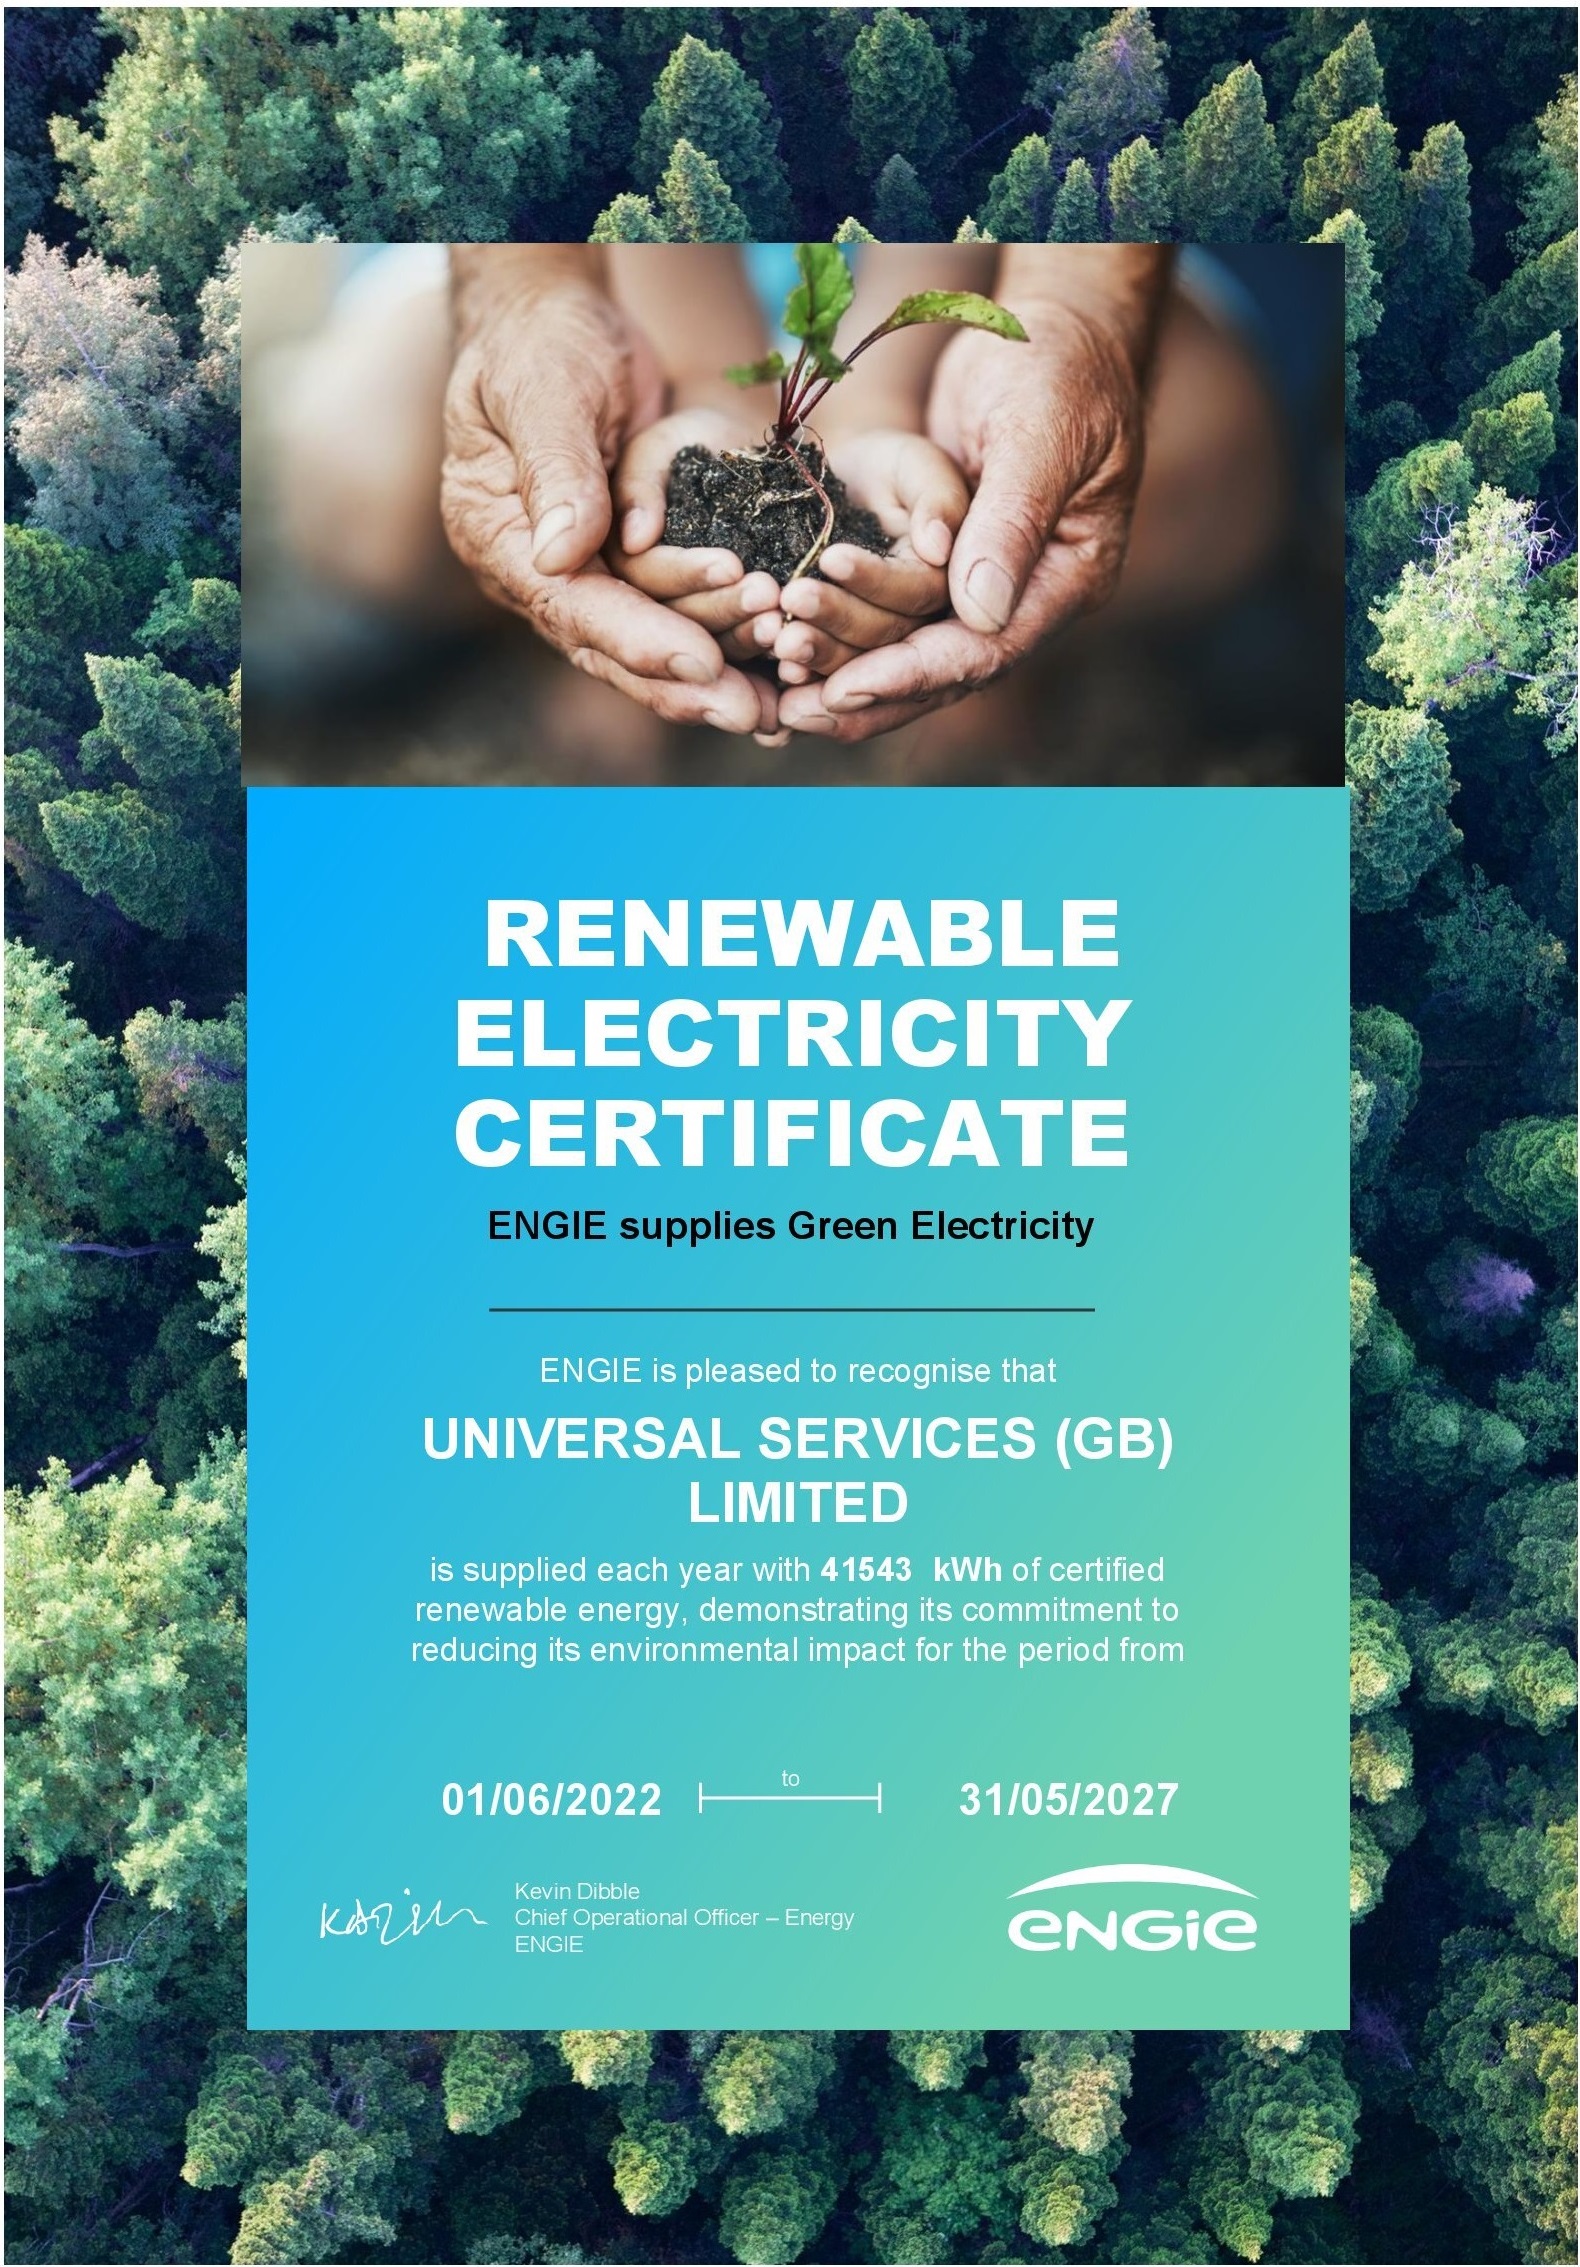 Renewable Energy Certificate from Engie